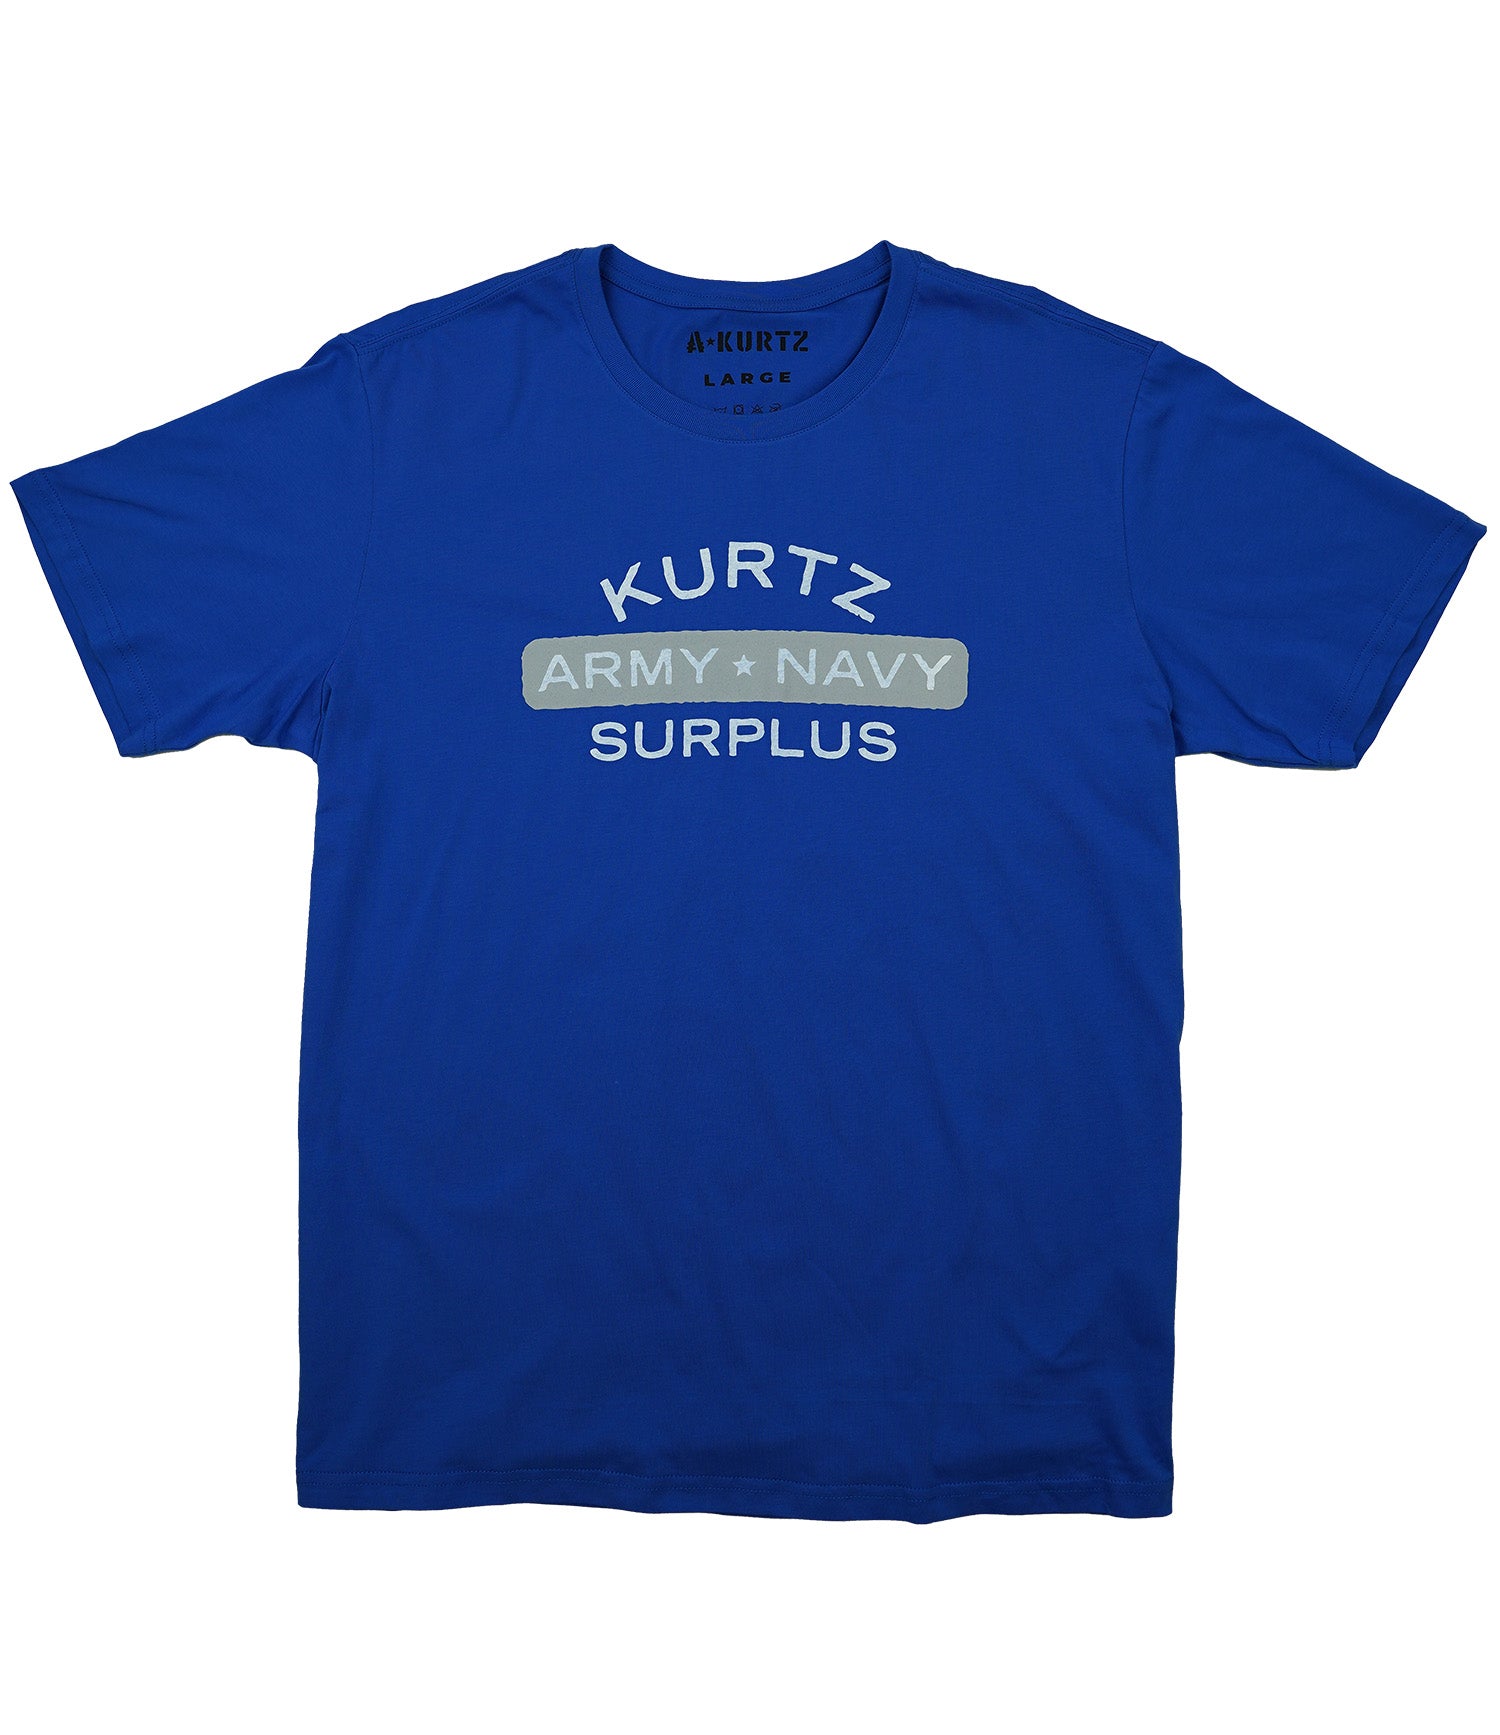 Military Surplus Tee - Blue - Front